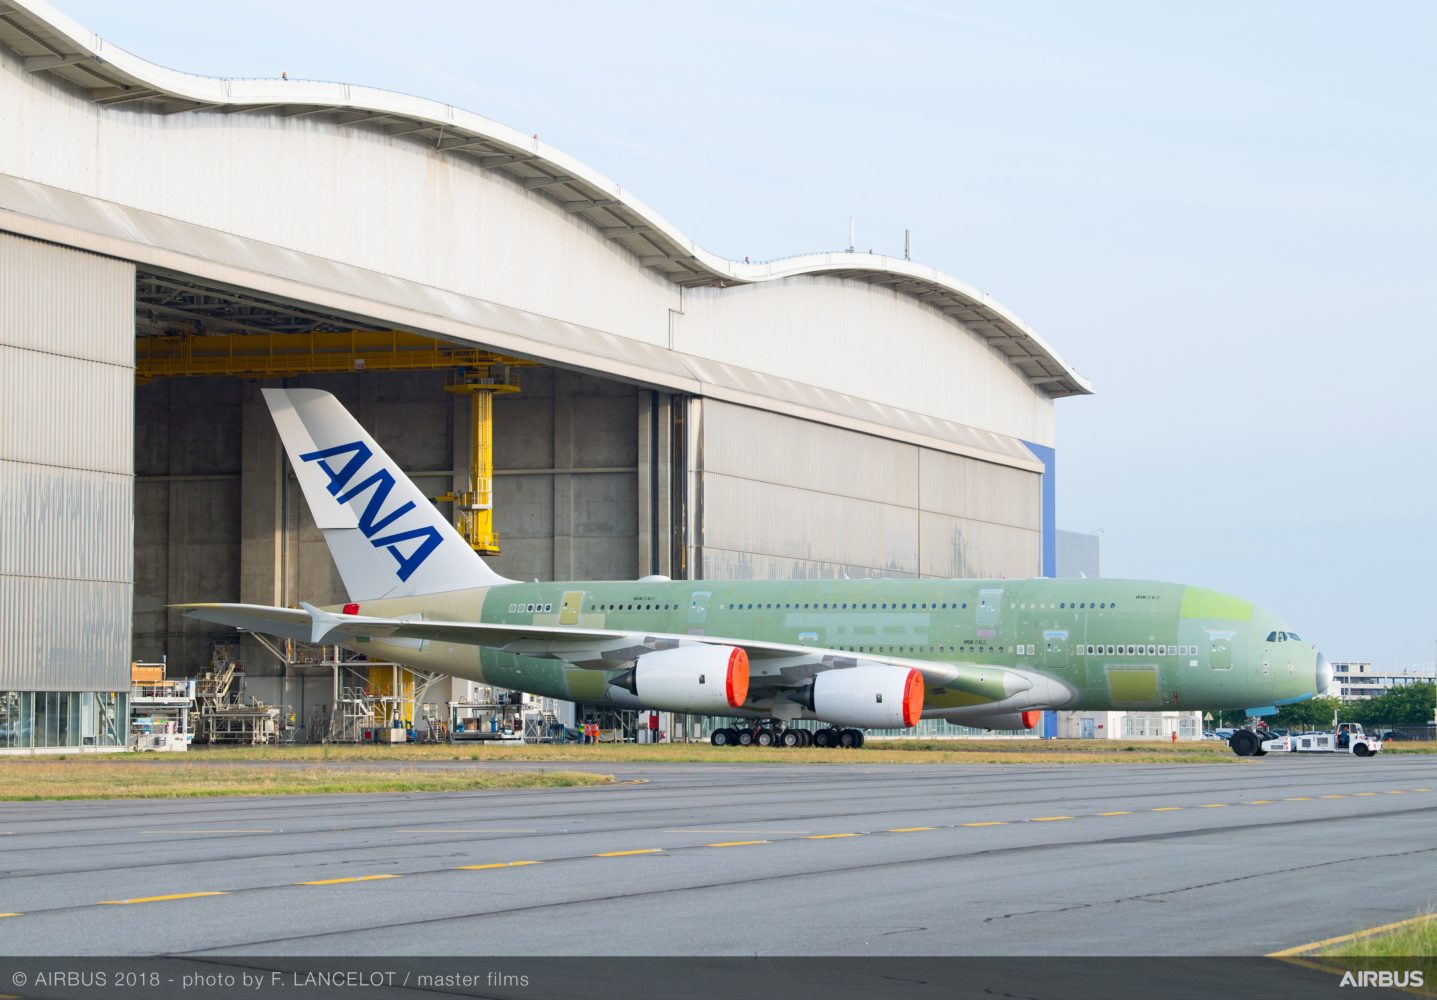 ANA Airbus A380 performs maiden flight